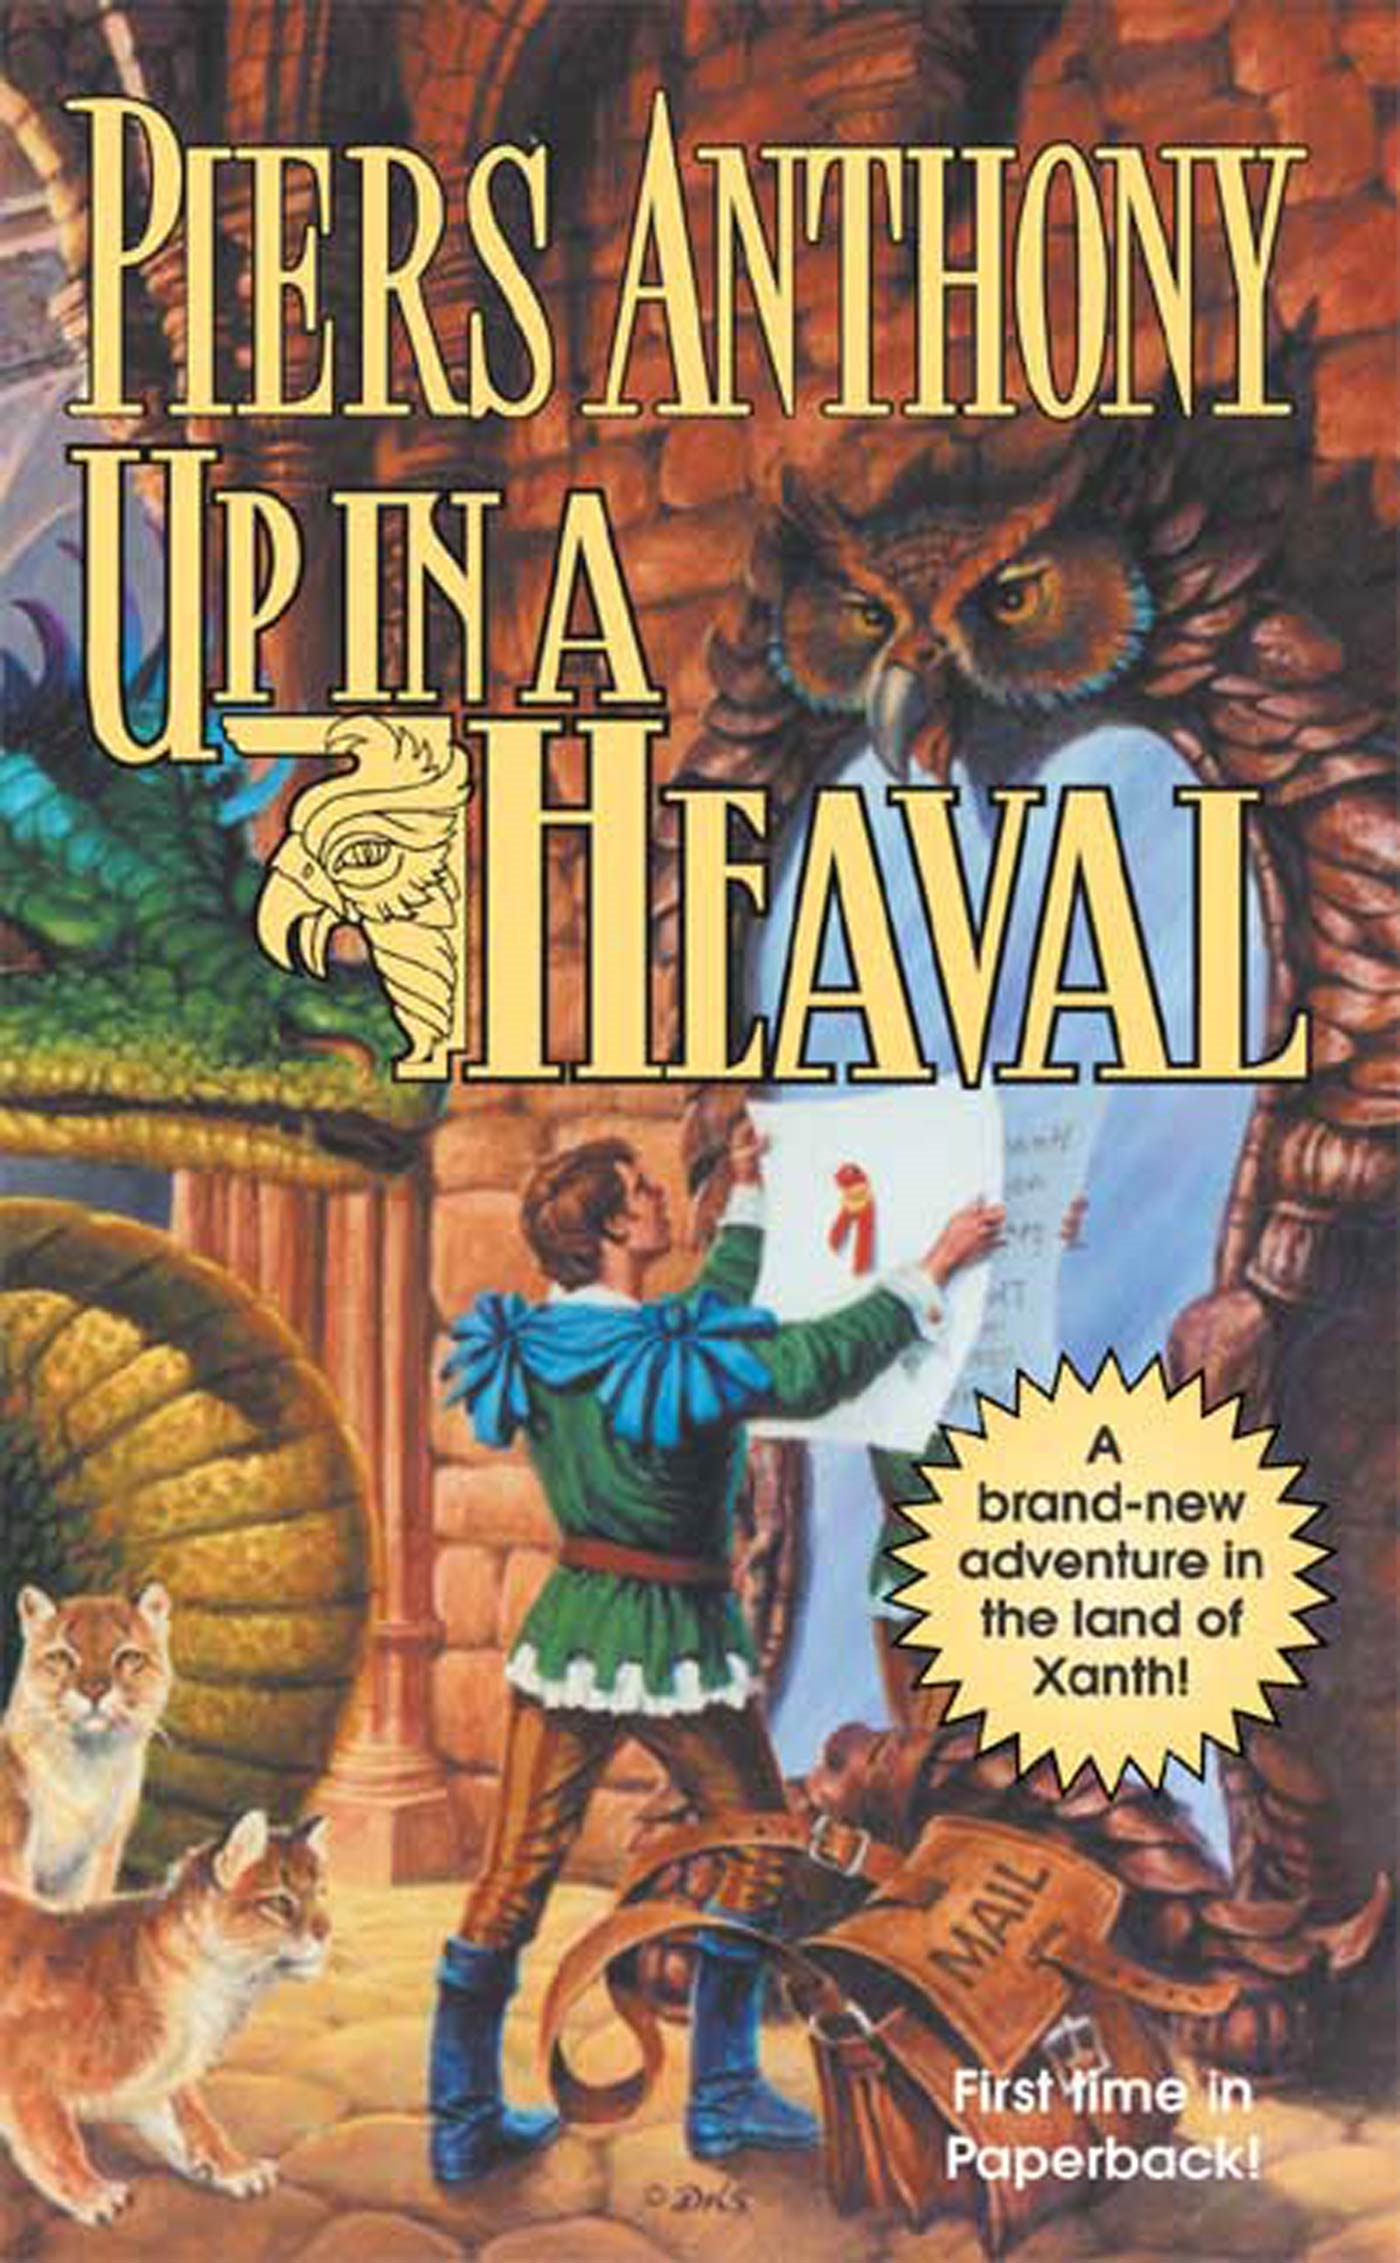 Up In a Heaval by Piers Anthony